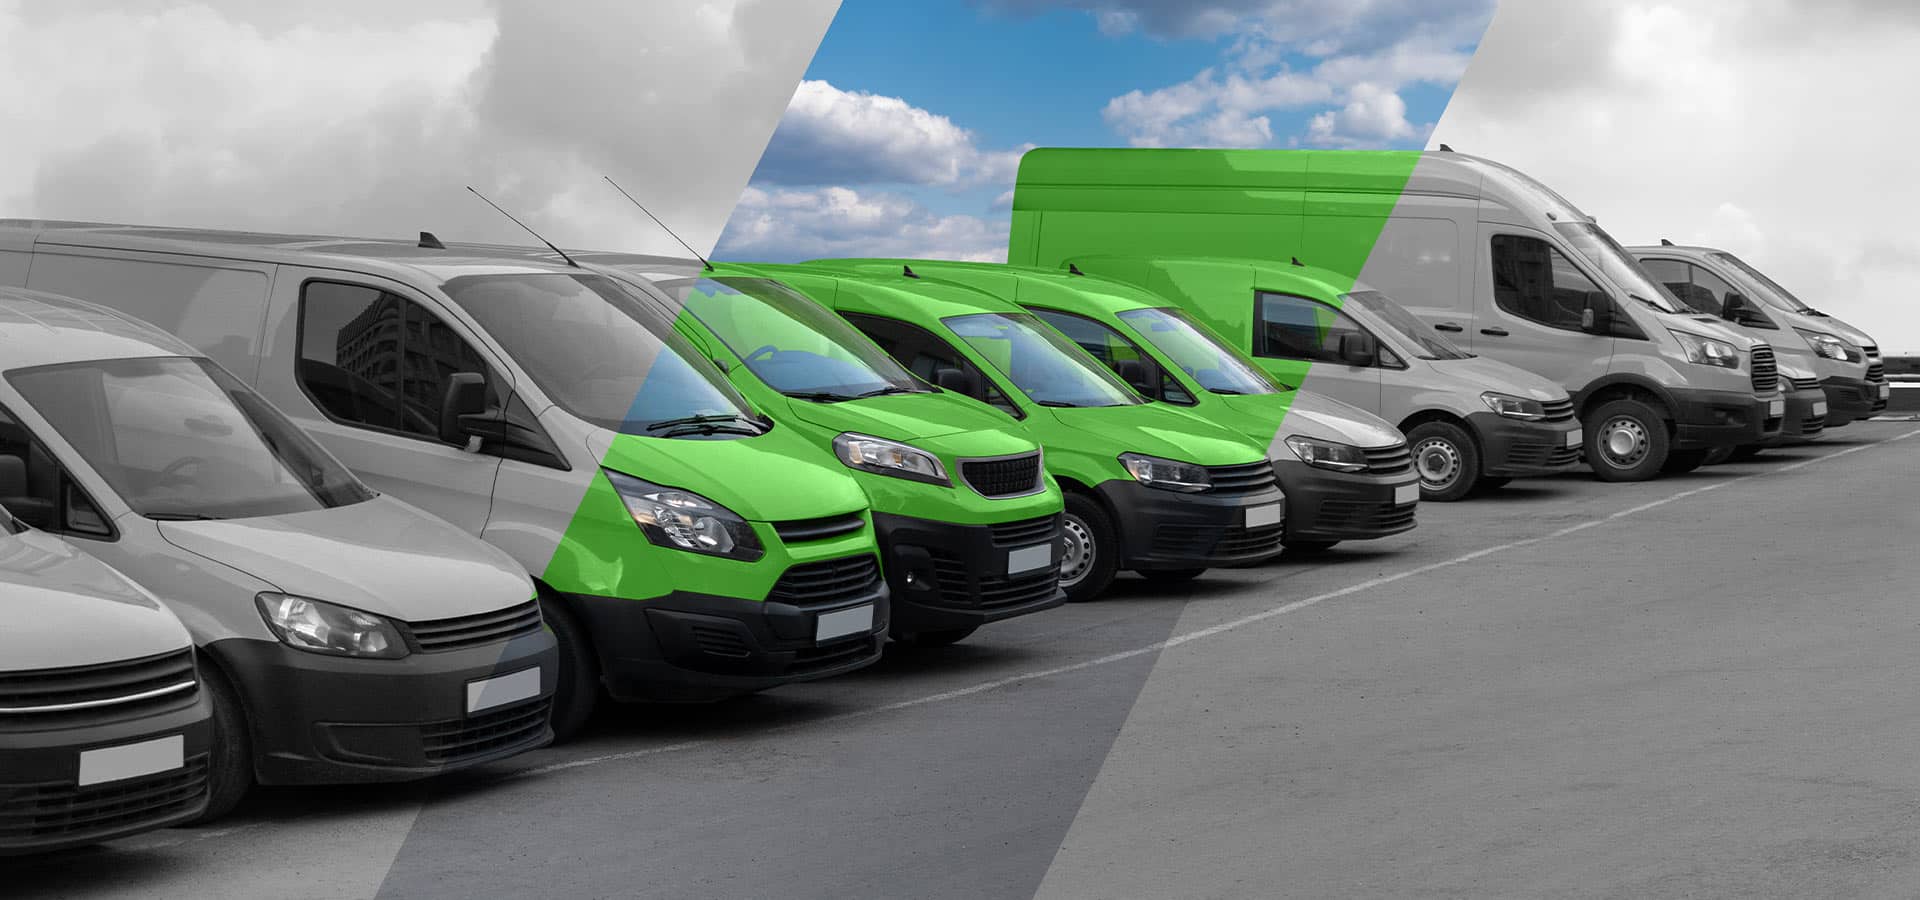 Fleet vehicles in a row with green strip